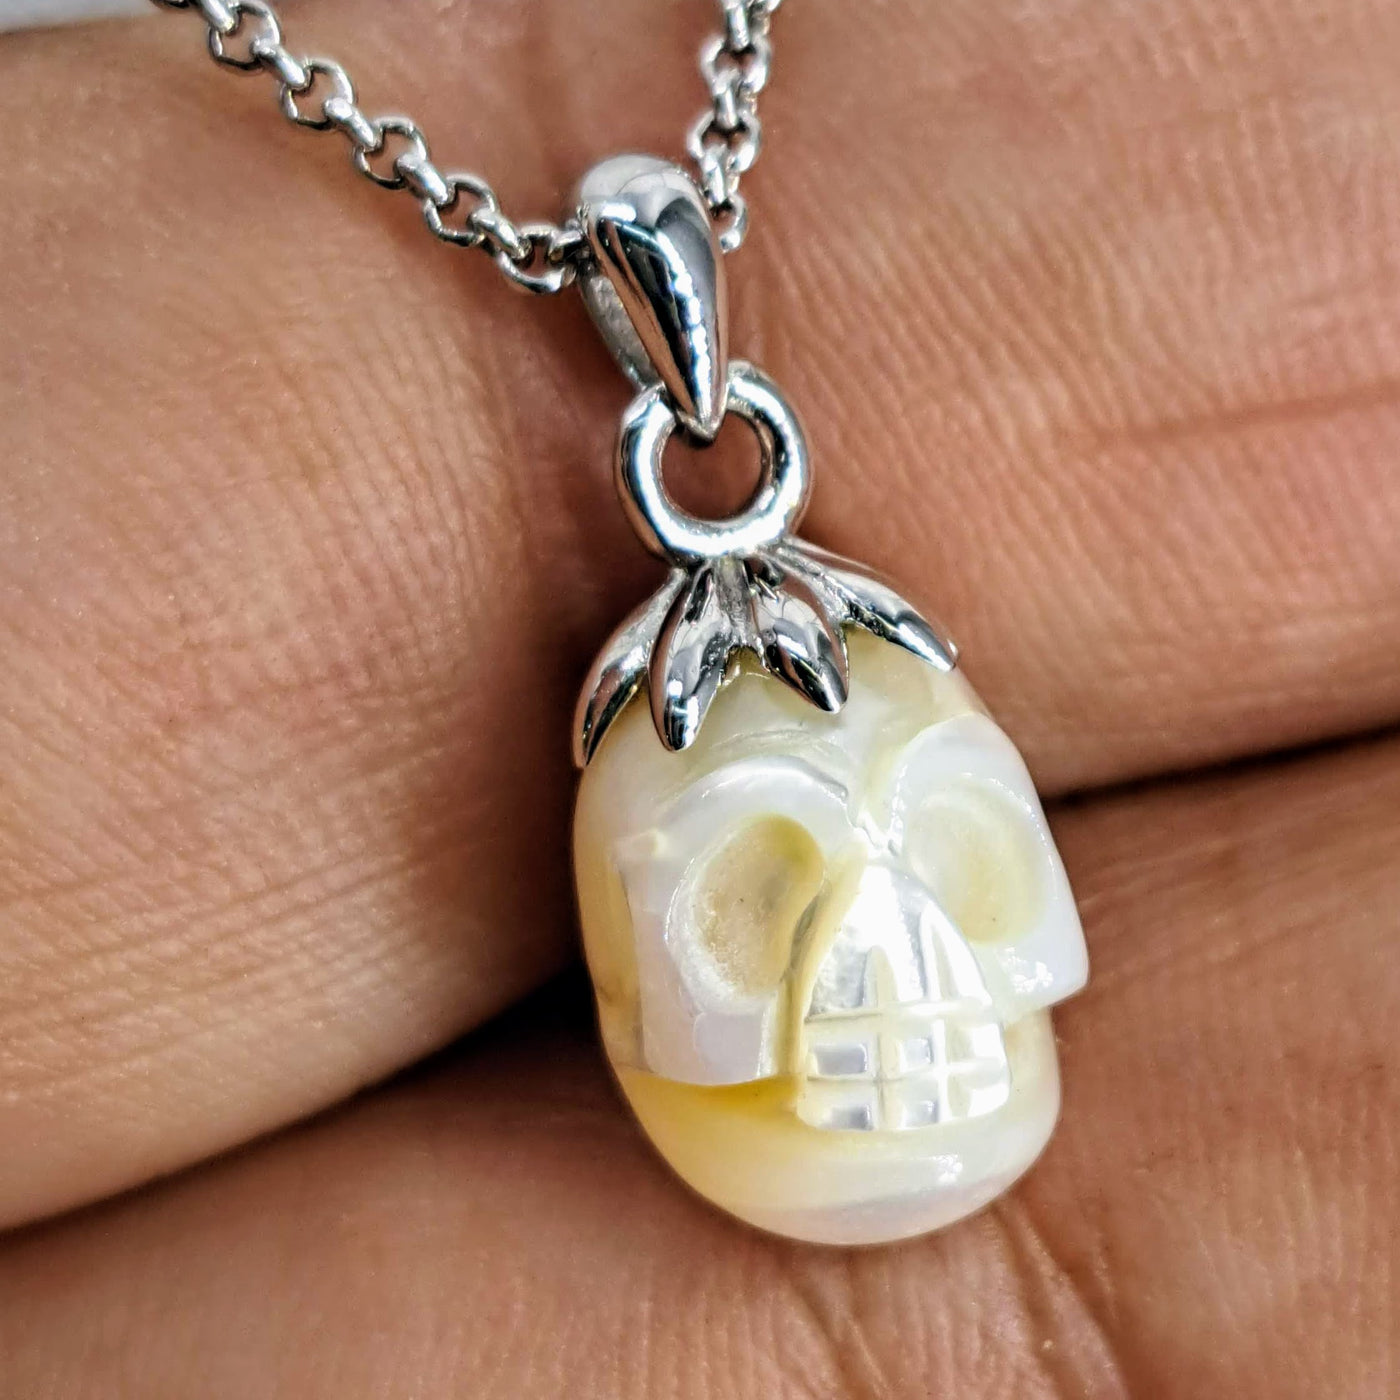 "Bone Island Charmer" Pendant Necklace - (Silver Or White) Carved Pearl Skull, Sterling